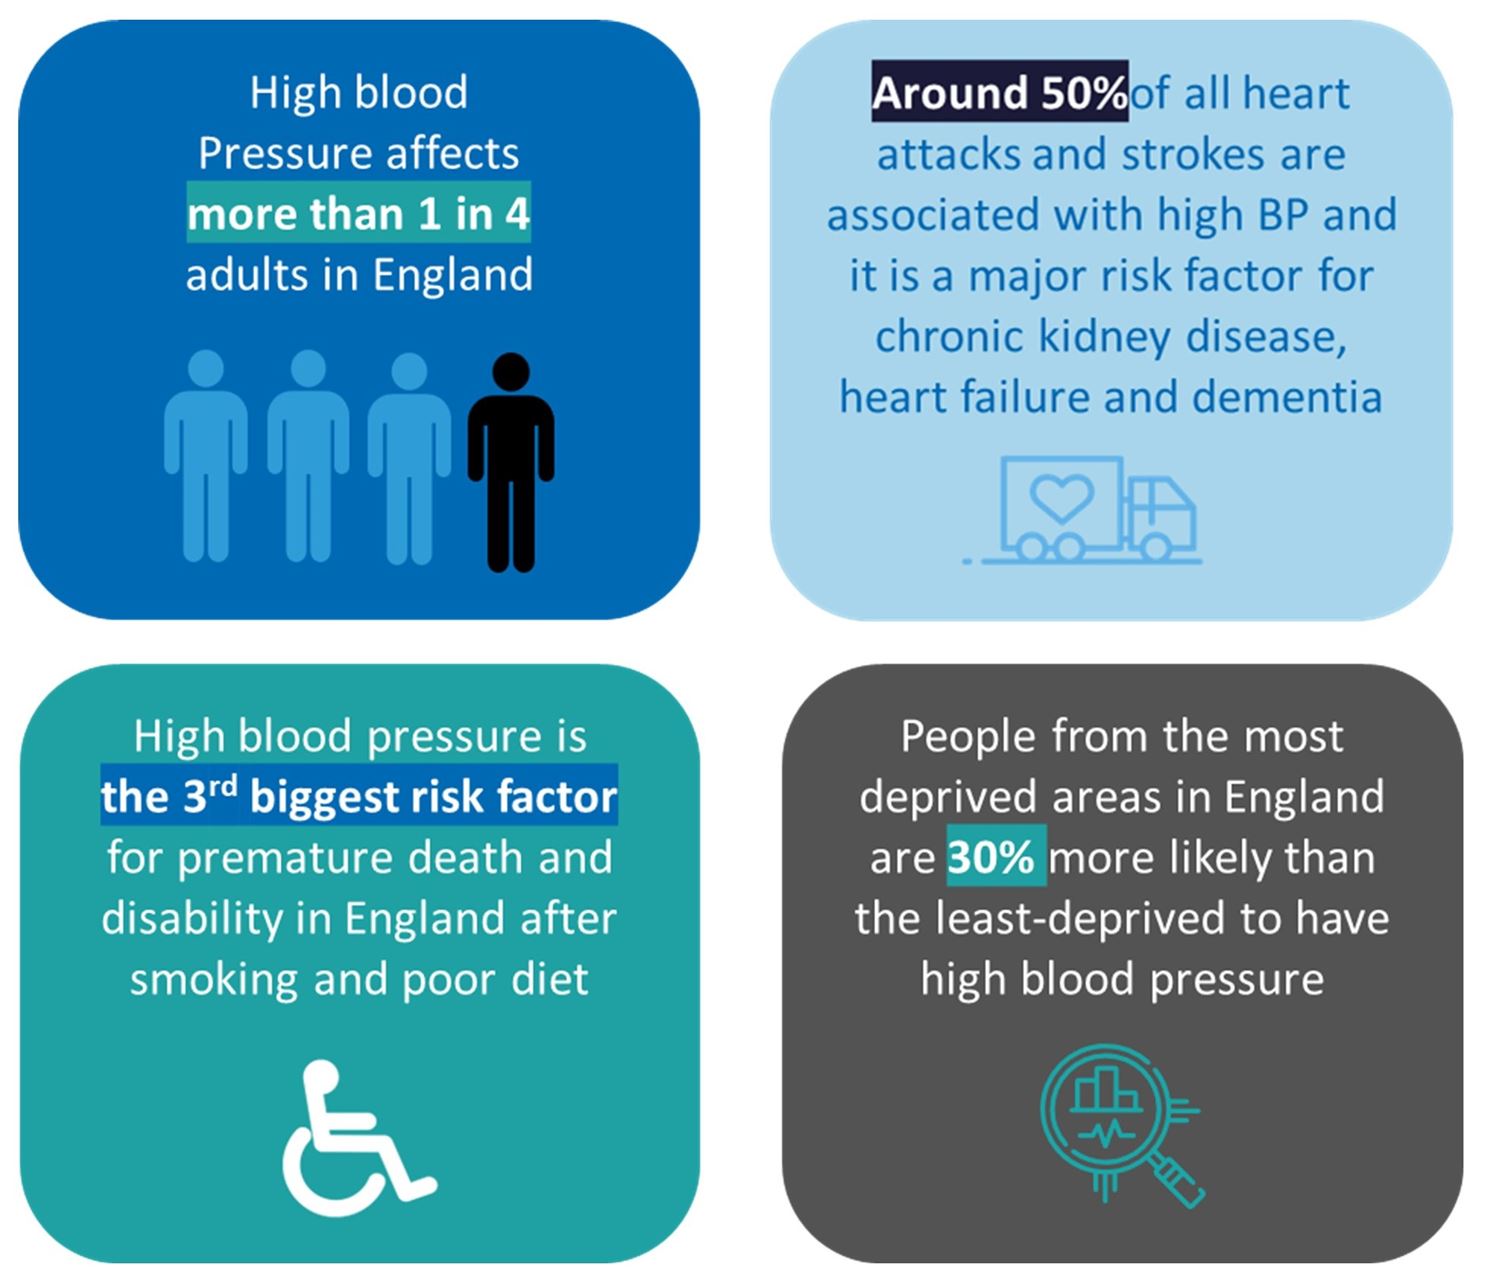 a series of boxes with the following text: high blood pressure affects more than 1 in 4 adults in England; around 50% of all heart attached and strokes are associated with high BP and it is a major risk factor for chronic kidney disease, heart failure and dementia; High blood pressure is the 3rd biggest risk factor for premature death and disability in England after smoking and poor diet; people from the most deprived areas in England are 30% more likely than the least-deprived to have high blood pressure.